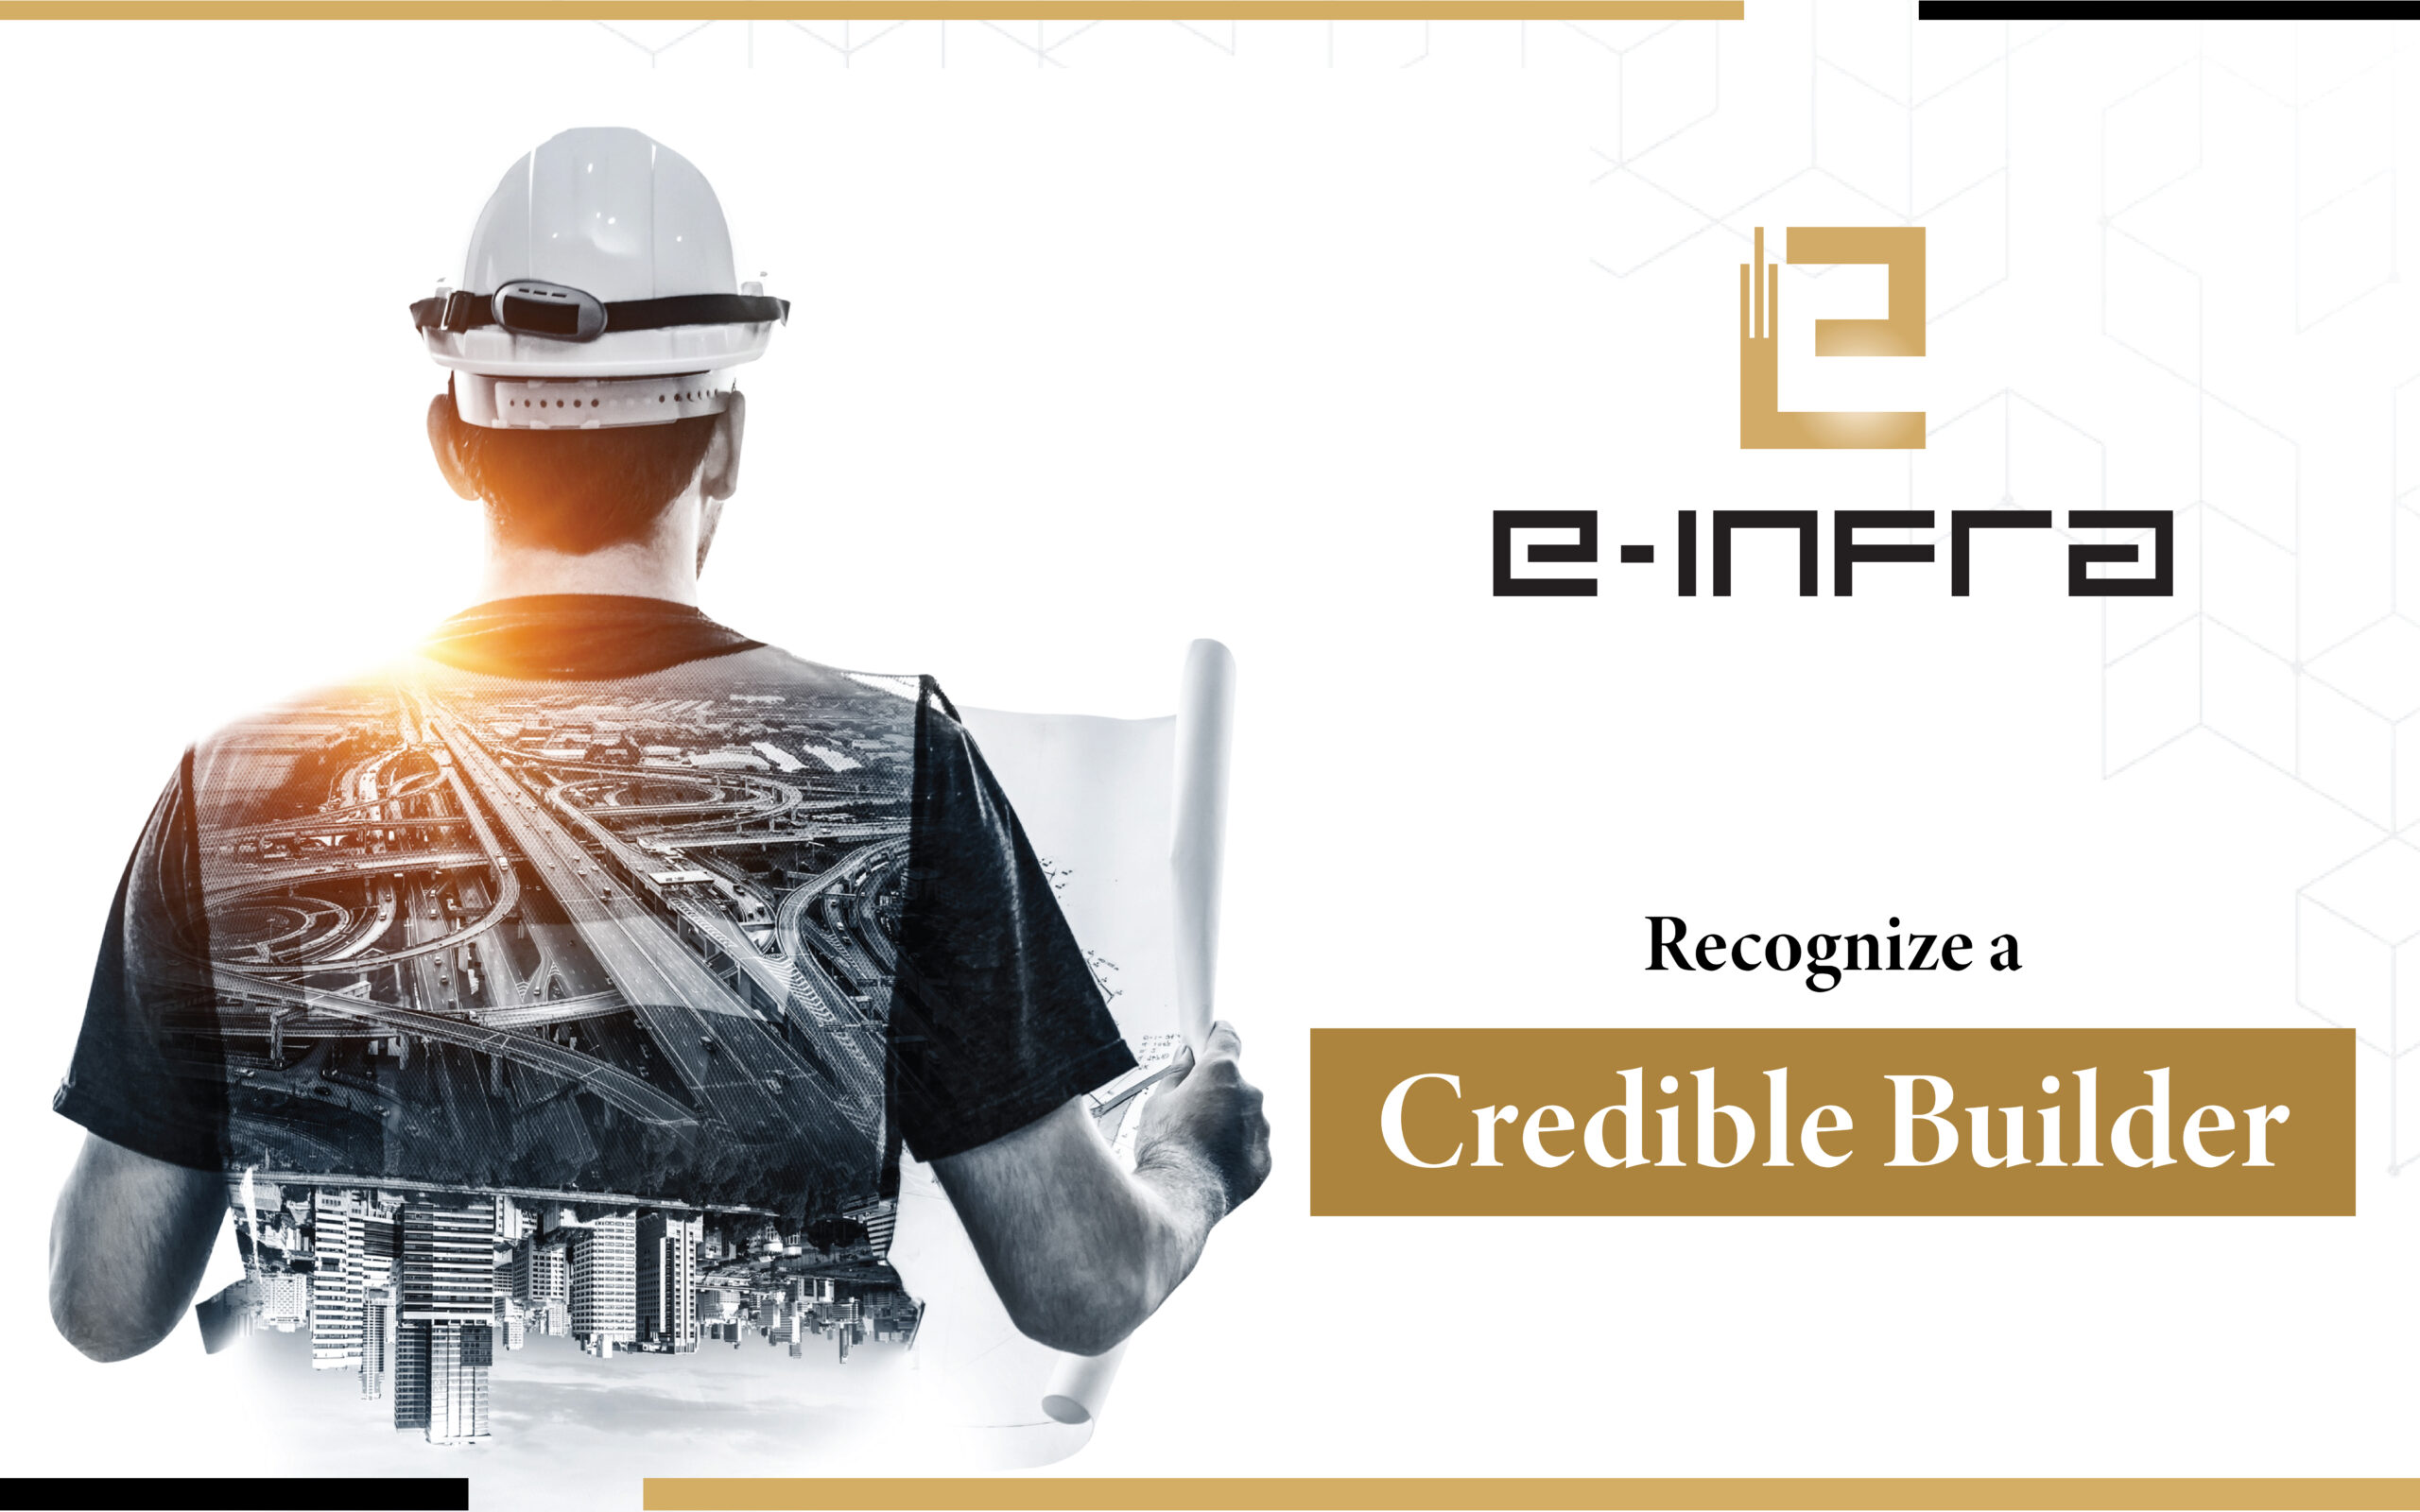 Recognize a credible builder from Einfra